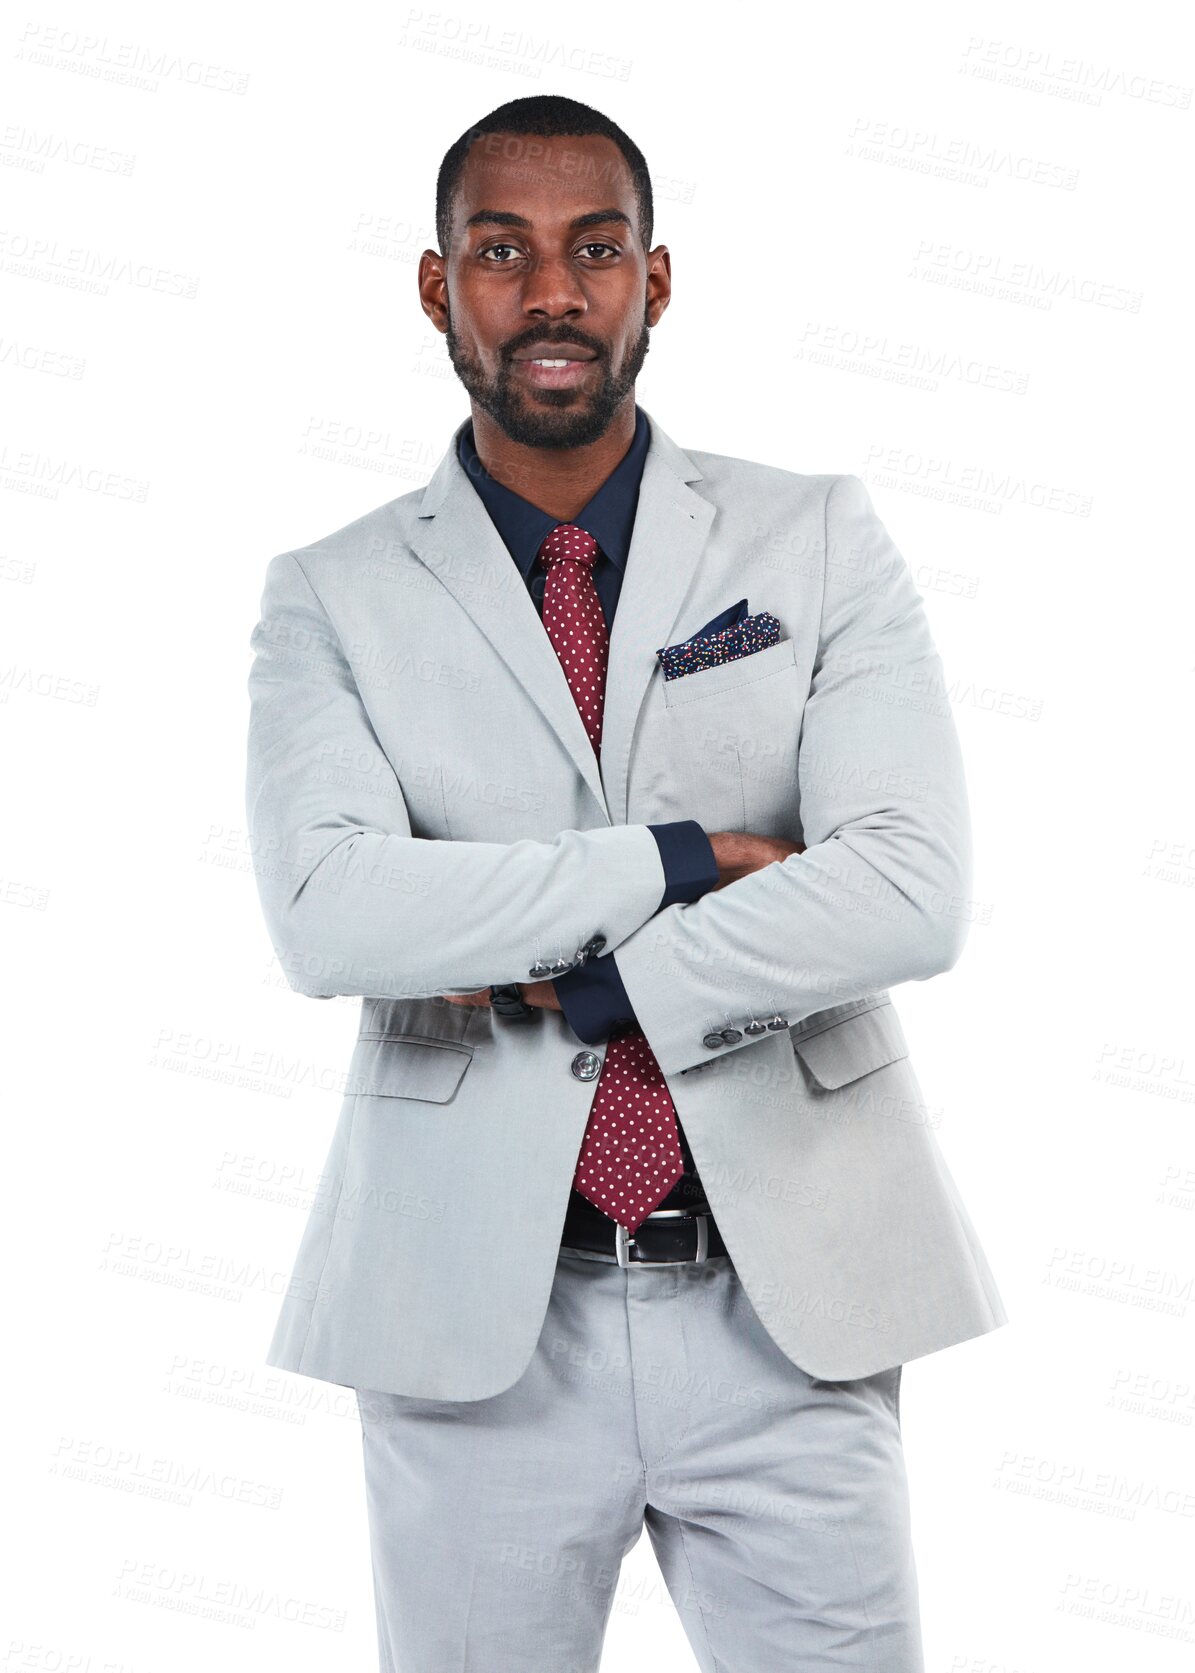 Buy stock photo Serious business, black man and portrait with arms crossed isolated on transparent png background. Male entrepreneur, professional corporate manager with pride, confidence and power suit of boss